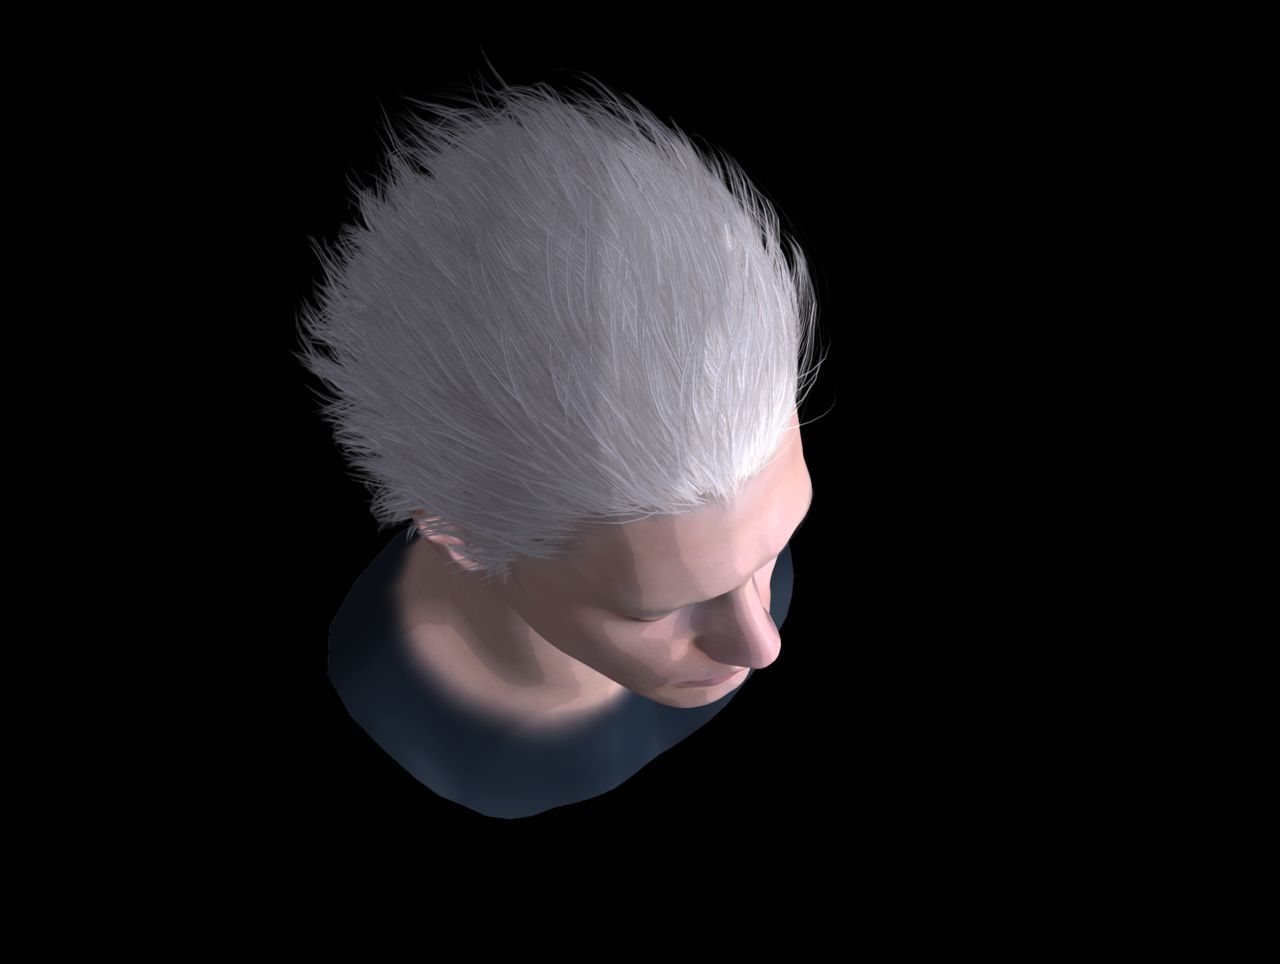 [J.A.] DMC5 | Vergil Head Reference PNG 48